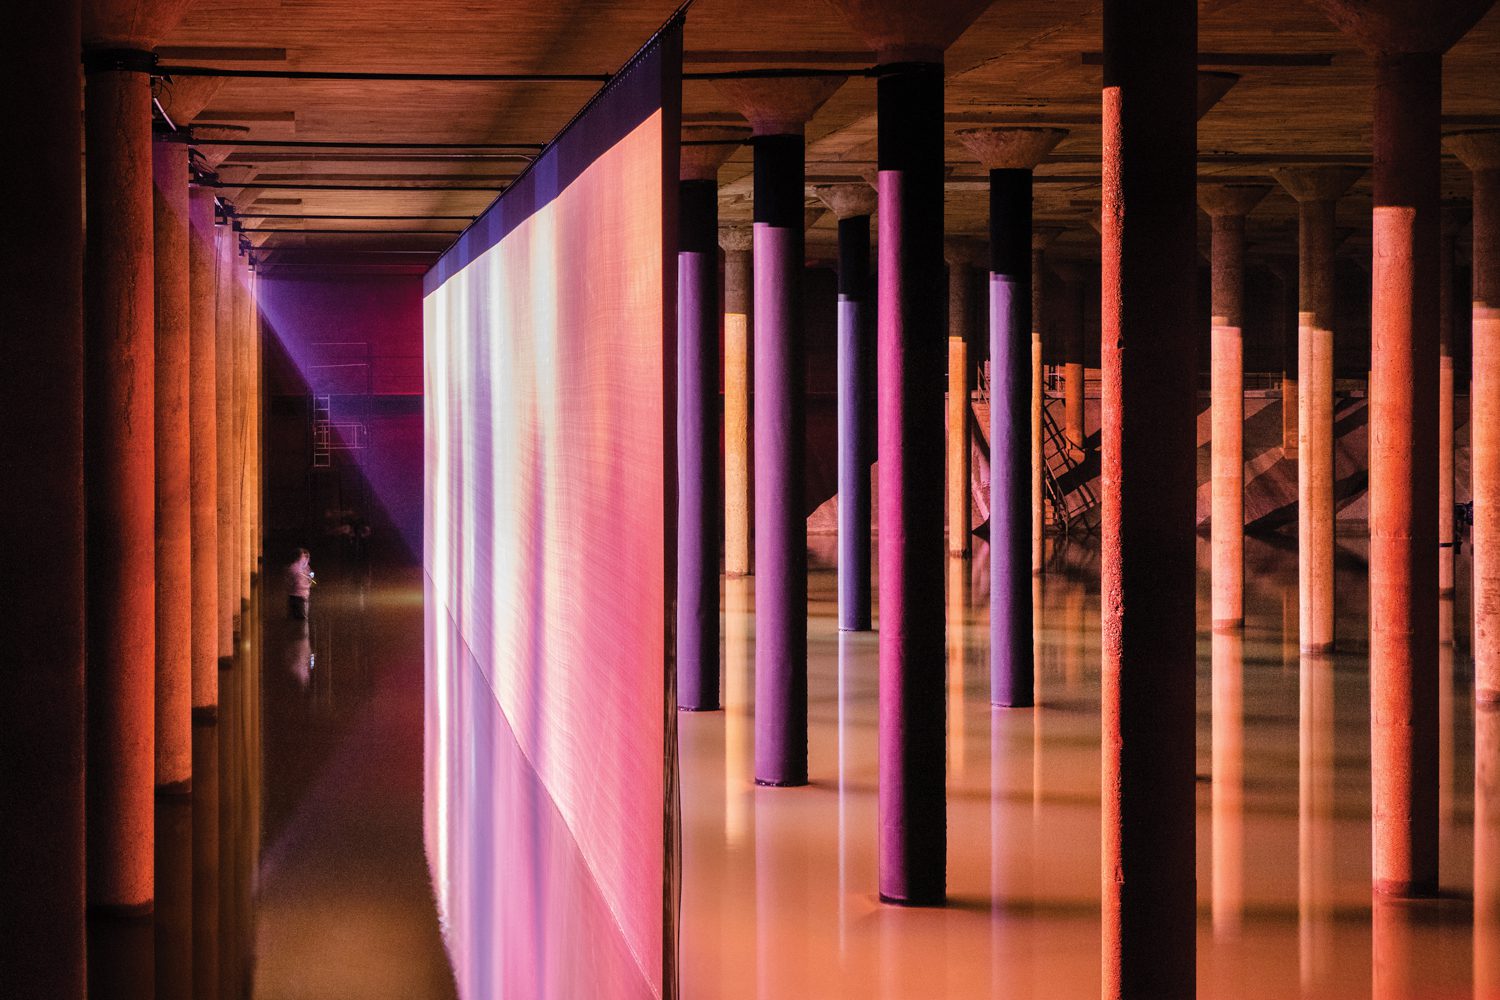 Anri Sala’s Time No Longer, an immersive film and sound installation commissioned for the Buffalo Bayou Cistern in Houston, is a merit recipient in the public spaces category.